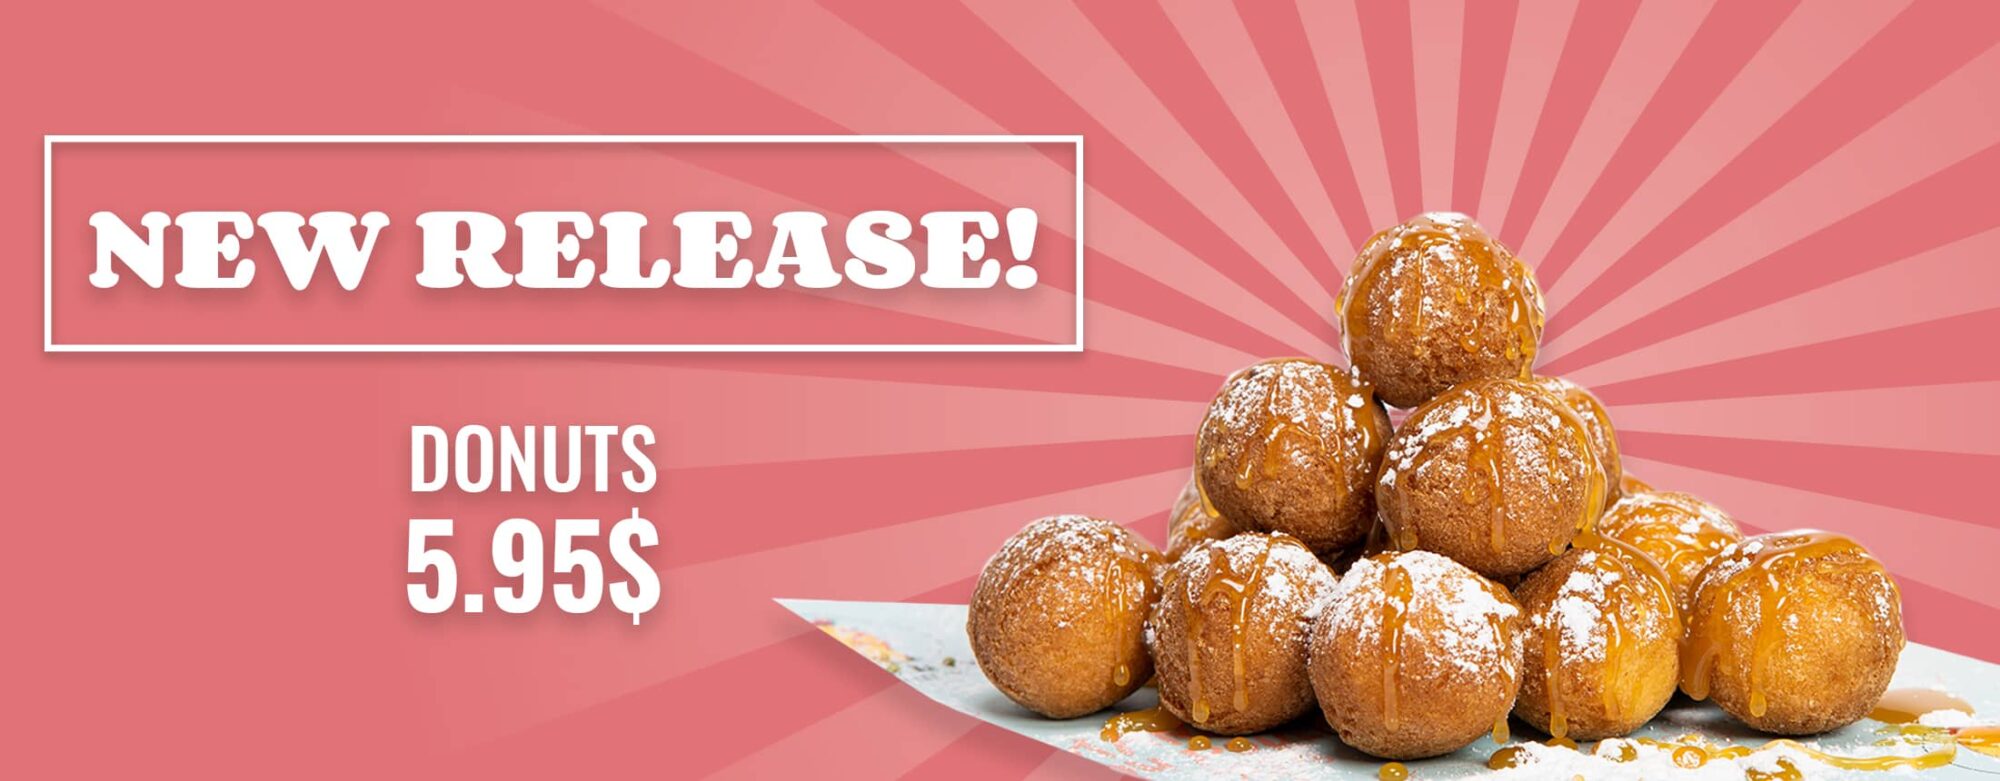 A mountain of donut holes with a pink background